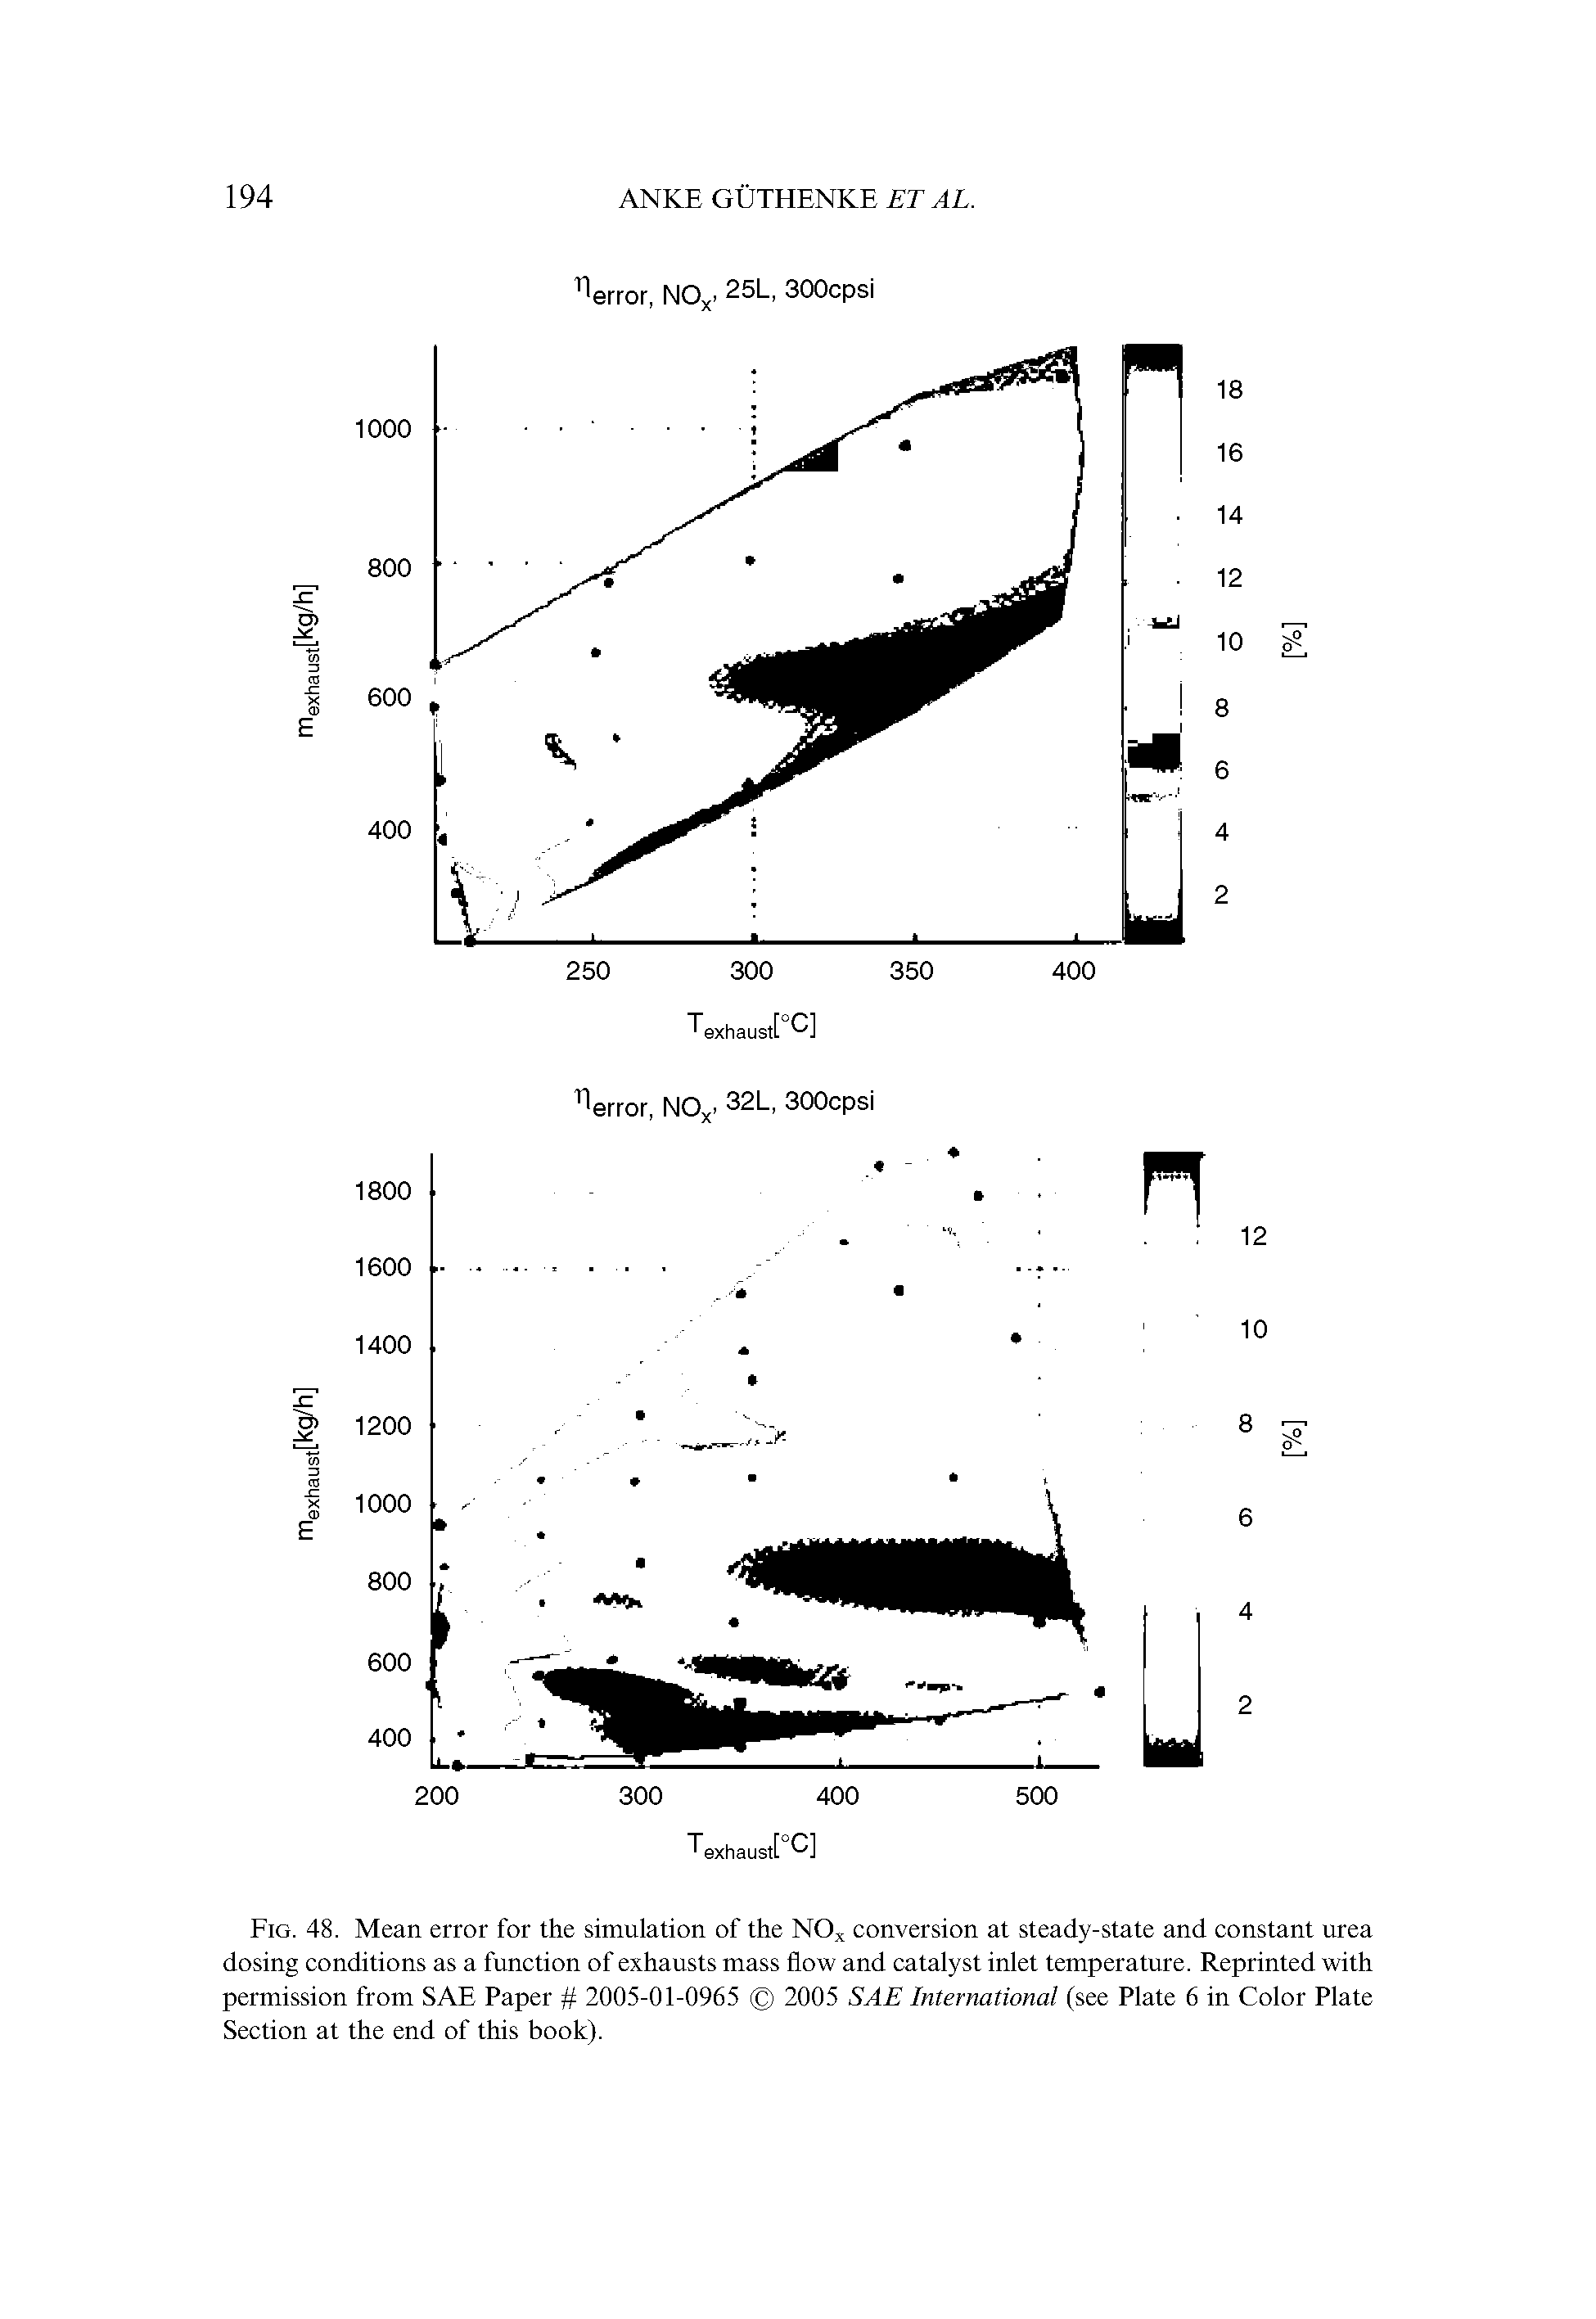 Fig. 48. Mean error for the simulation of the NOx conversion at steady-state and constant urea dosing conditions as a function of exhausts mass flow and catalyst inlet temperature. Reprinted with permission from SAE Paper 2005-01-0965 2005 SAE International (see Plate 6 in Color Plate Section at the end of this book).